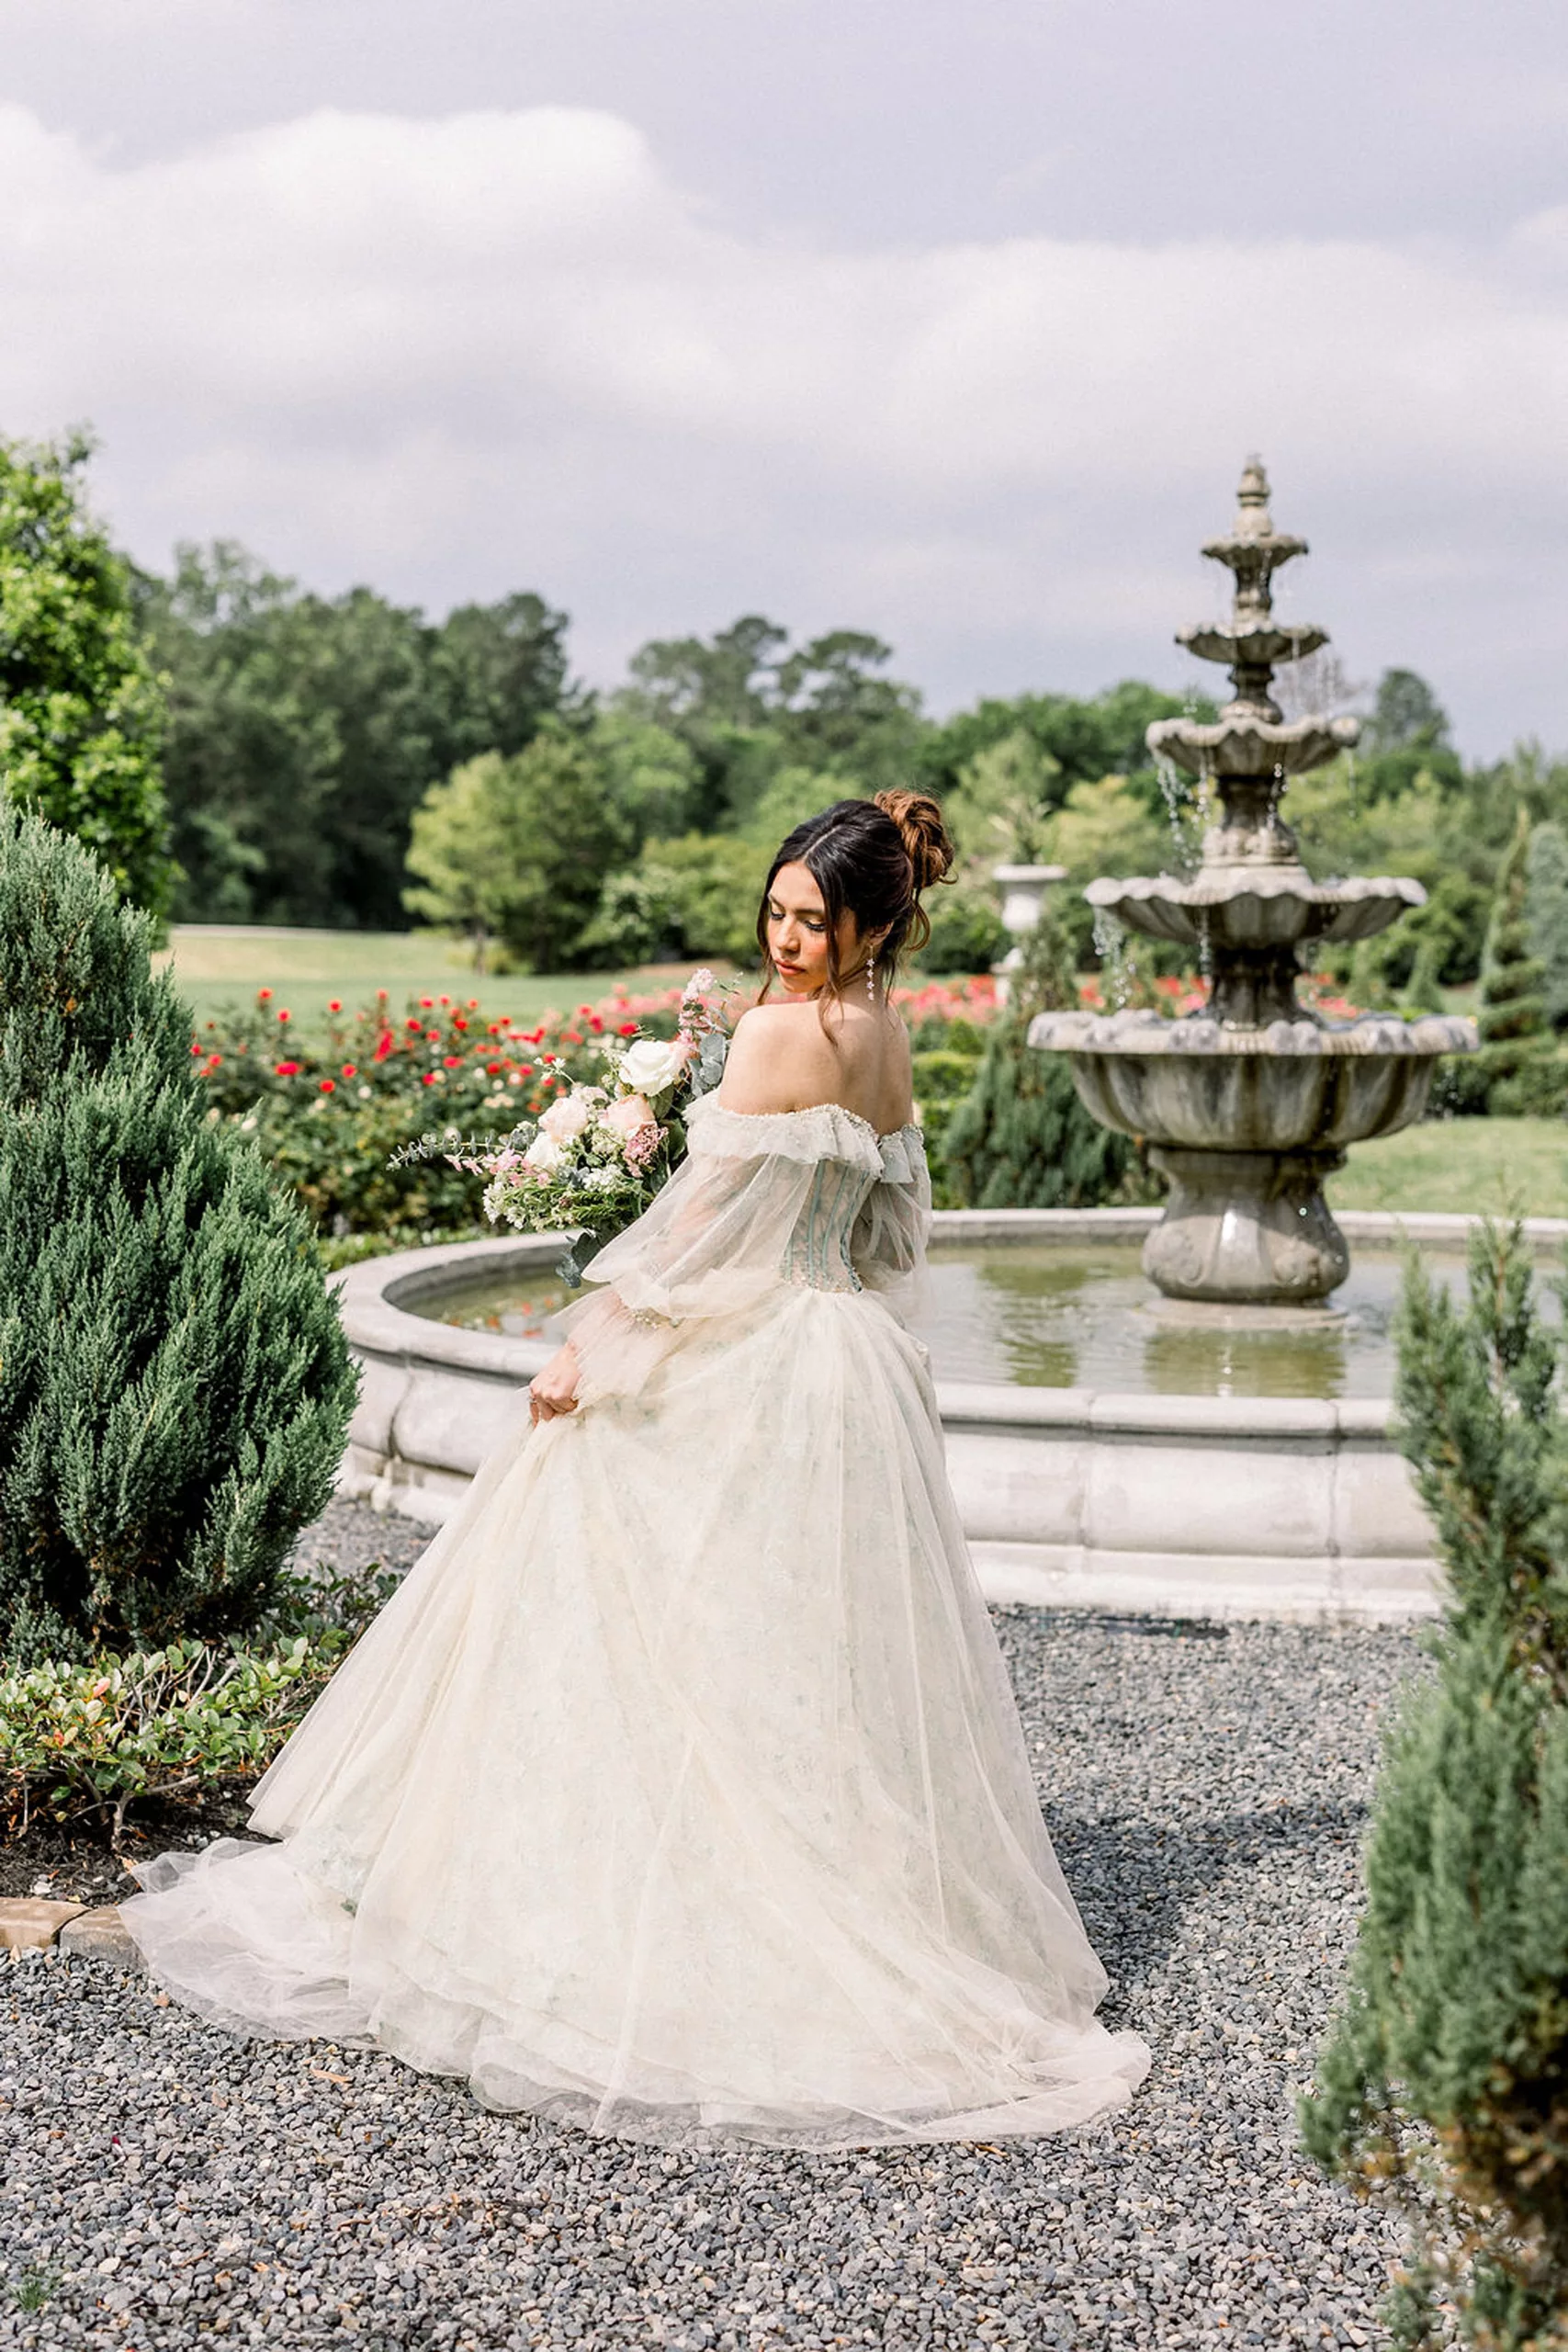 A bride twirls and looks down at her train while standing in a gravel path by a garden fountain